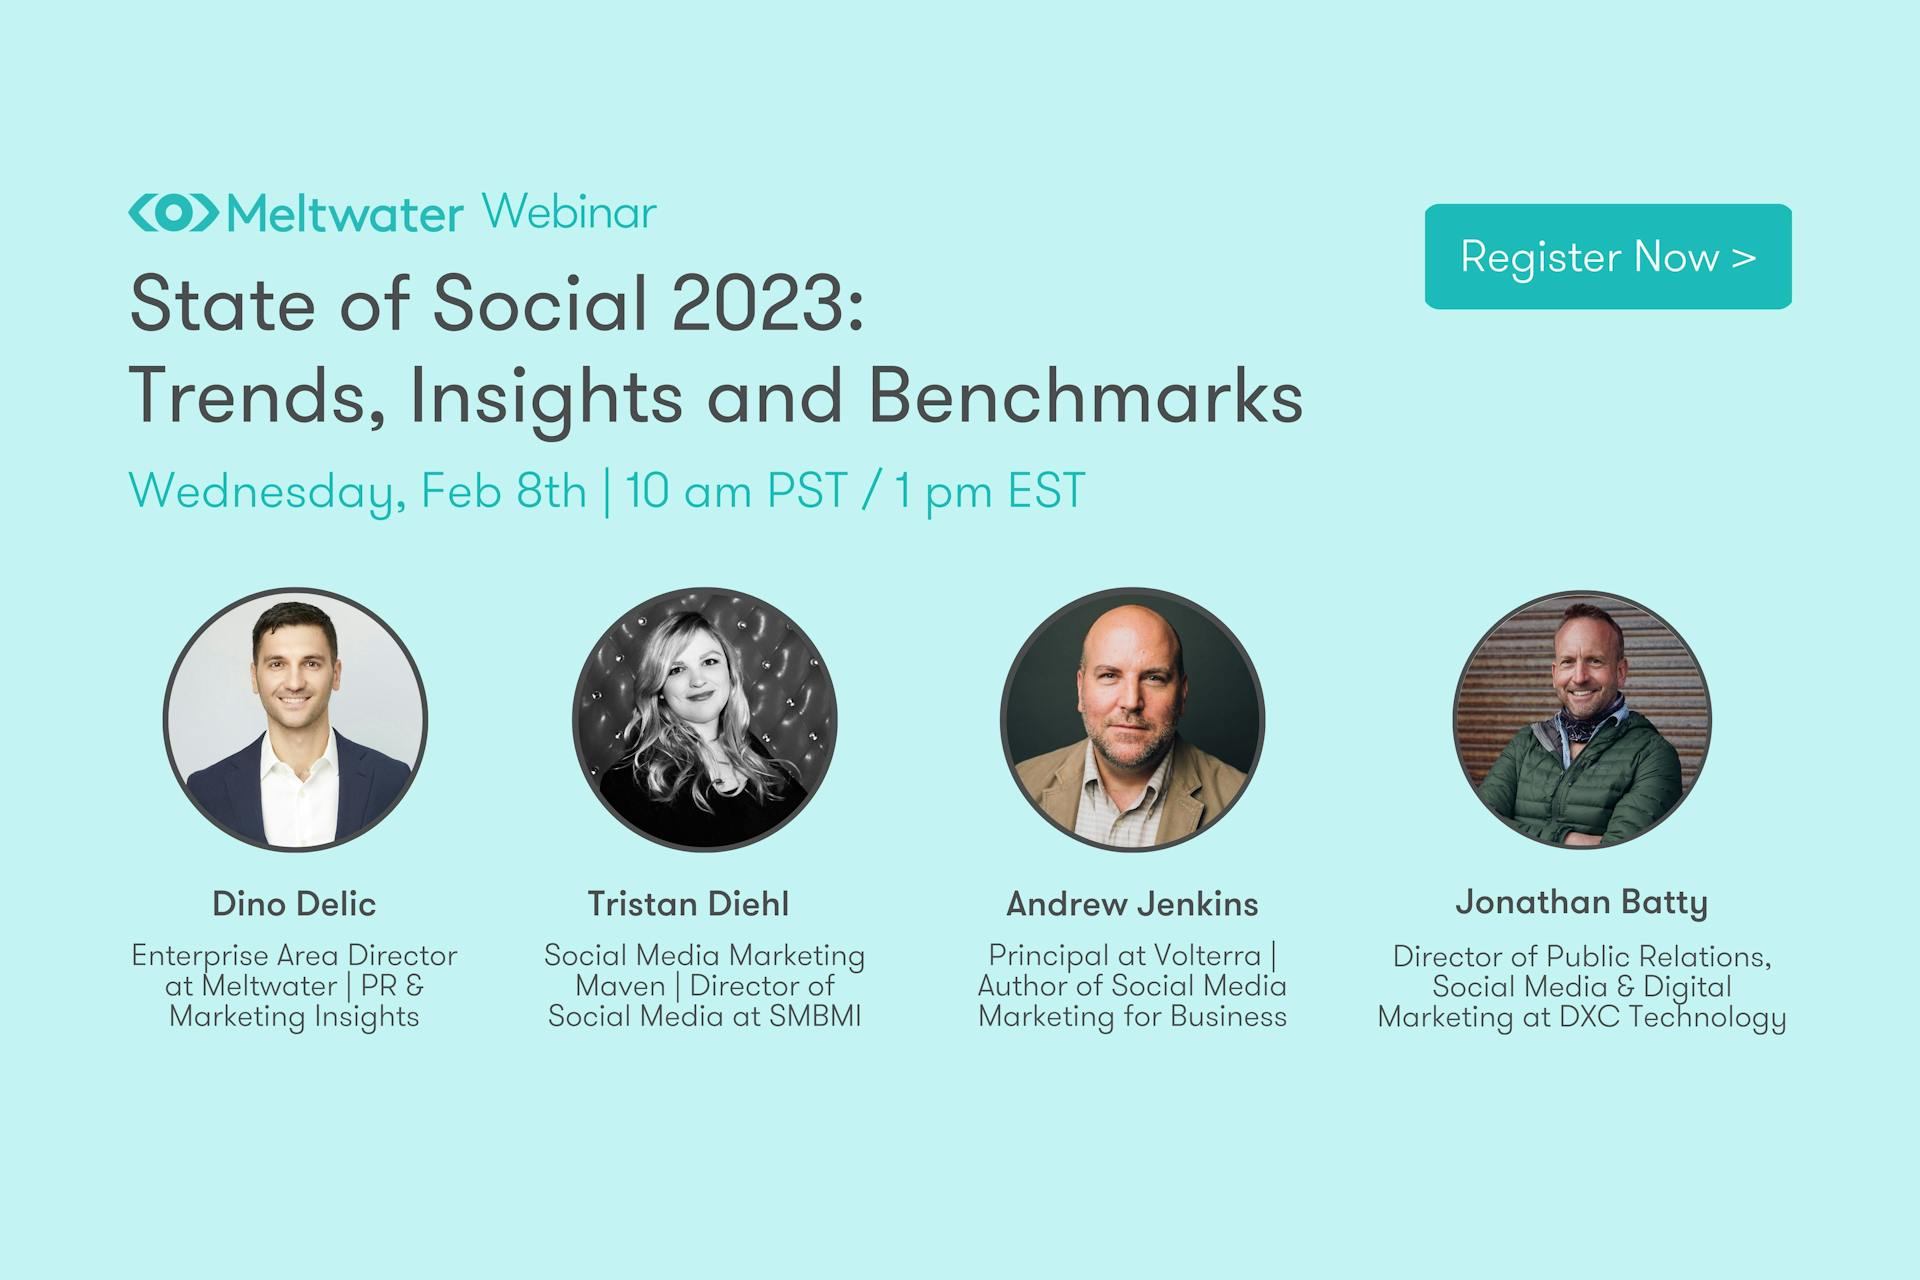 State of Social 2023: Trends, Insights and Benchmarks (Meltwater Webinar)